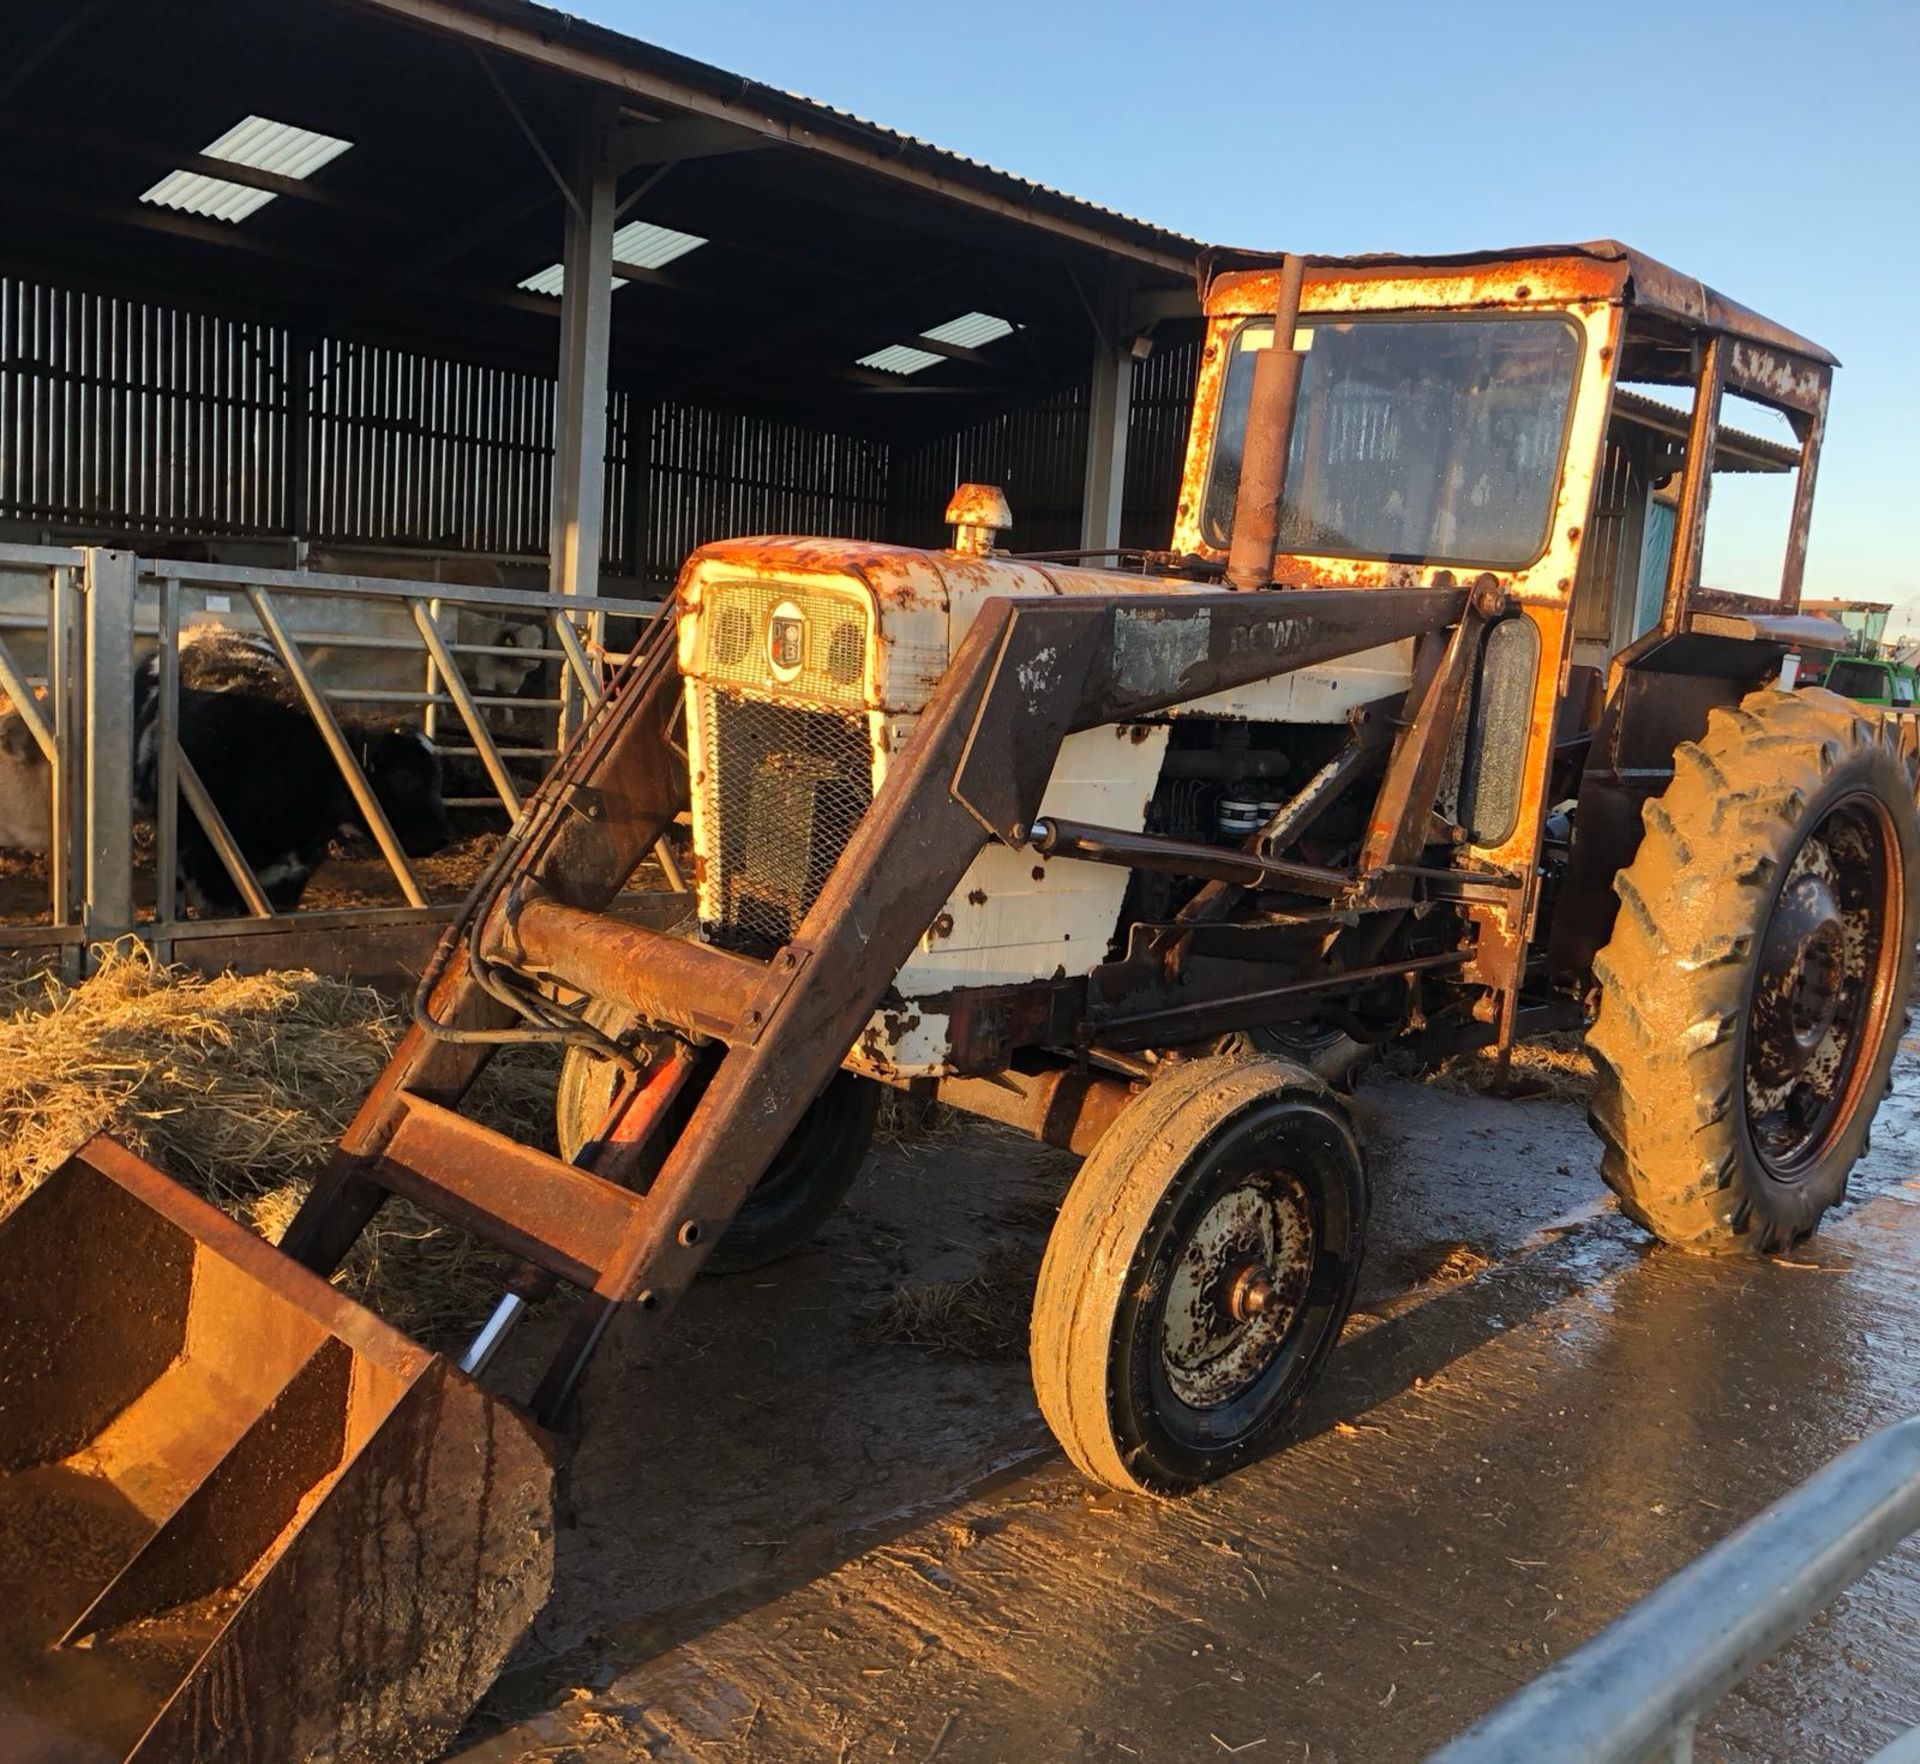 1971 DAVID BROWN 1200 TRACTOR, STARTS WITH A JUMP PACK, DRIVES AND LIFTS *PLUS VAT* - Image 4 of 16